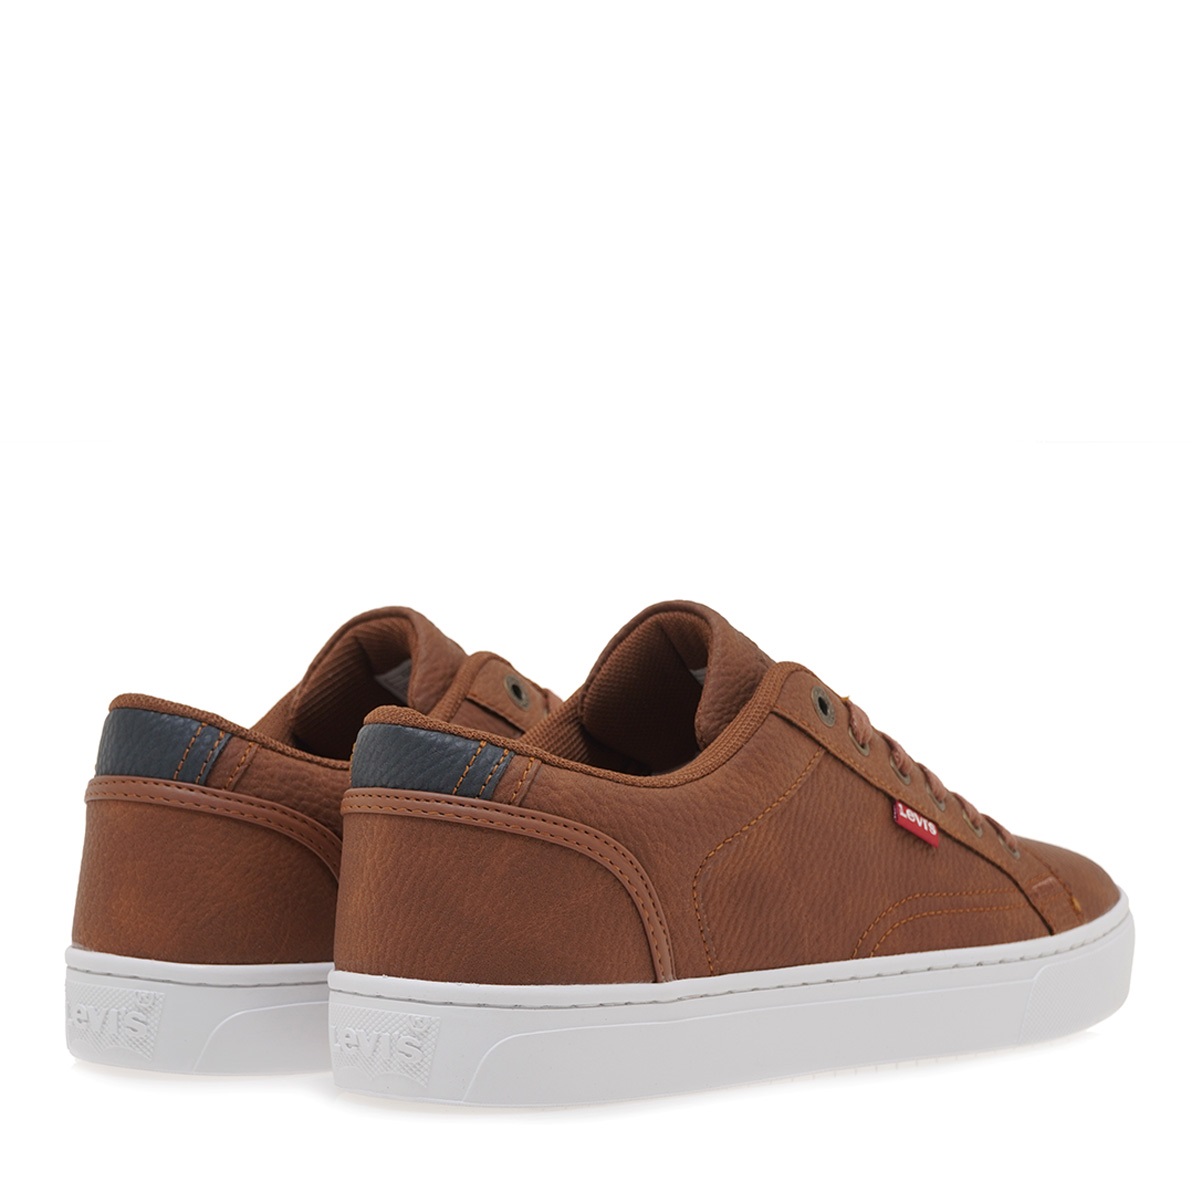 Levi's Courtright Ανδρικά Sneakers Tαμπά  232805-794-28